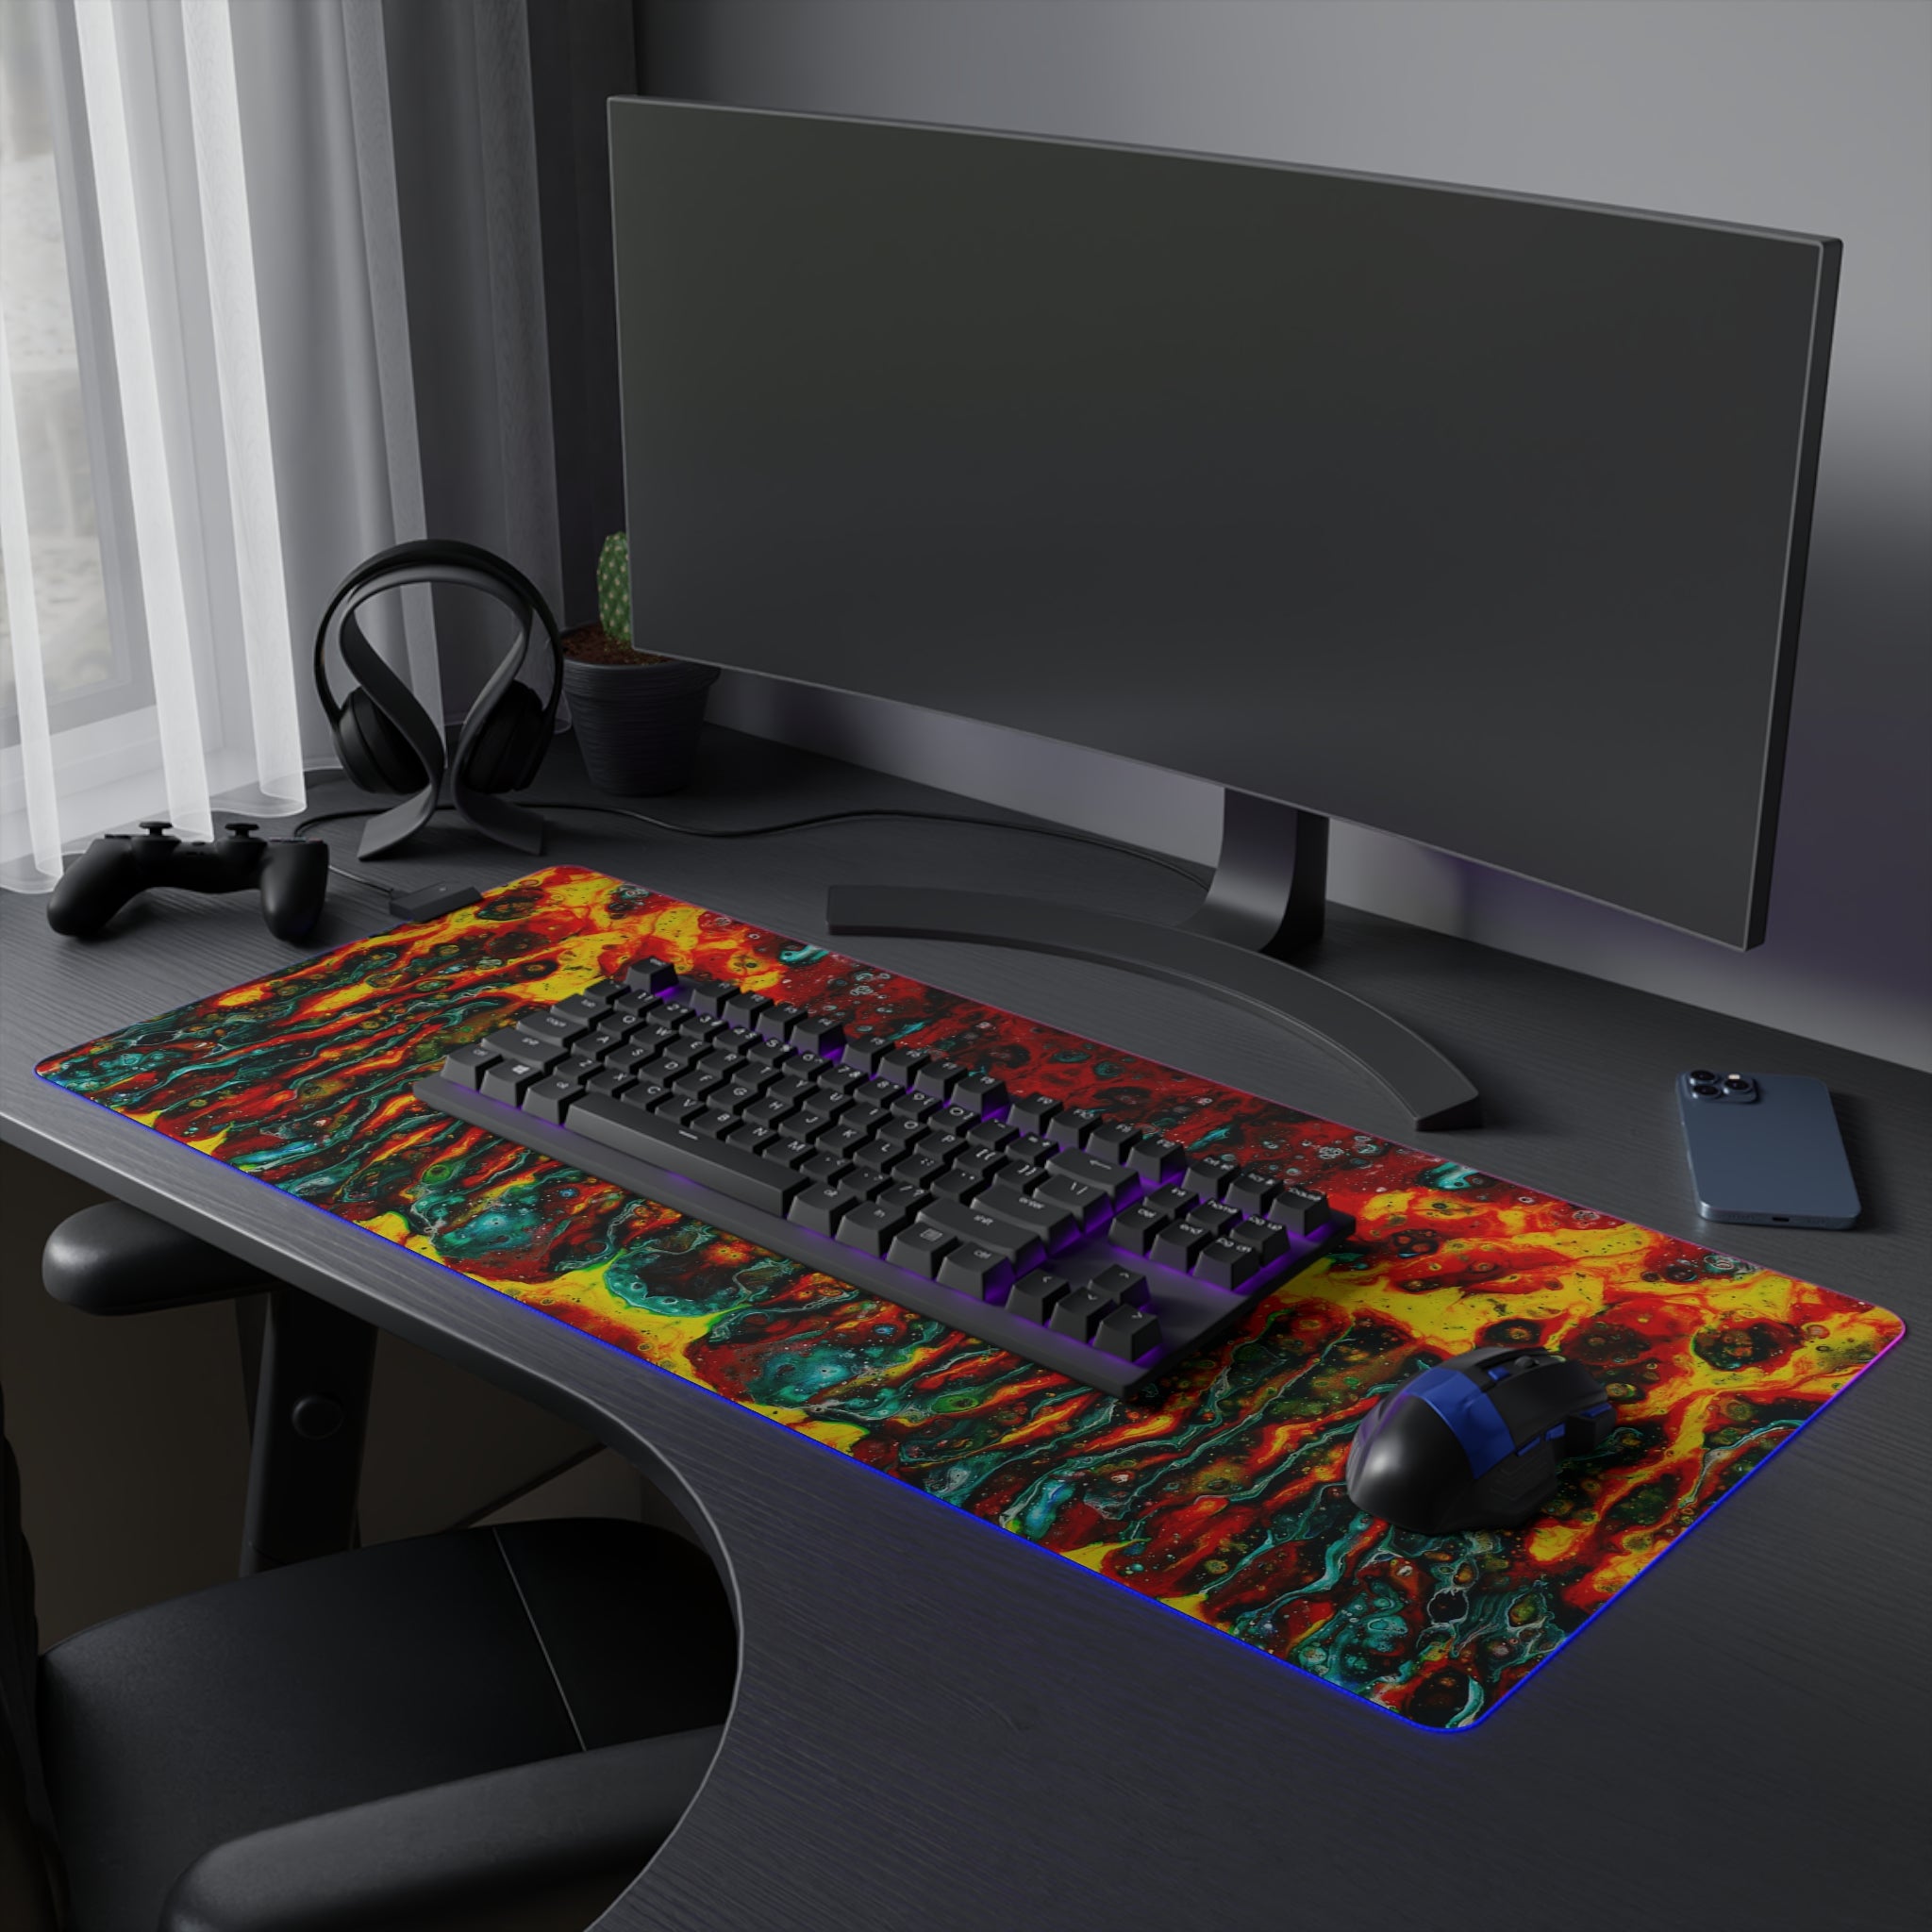 Cameron Creations - LED Gaming Mouse Pad - Floating Flames - Concept 1